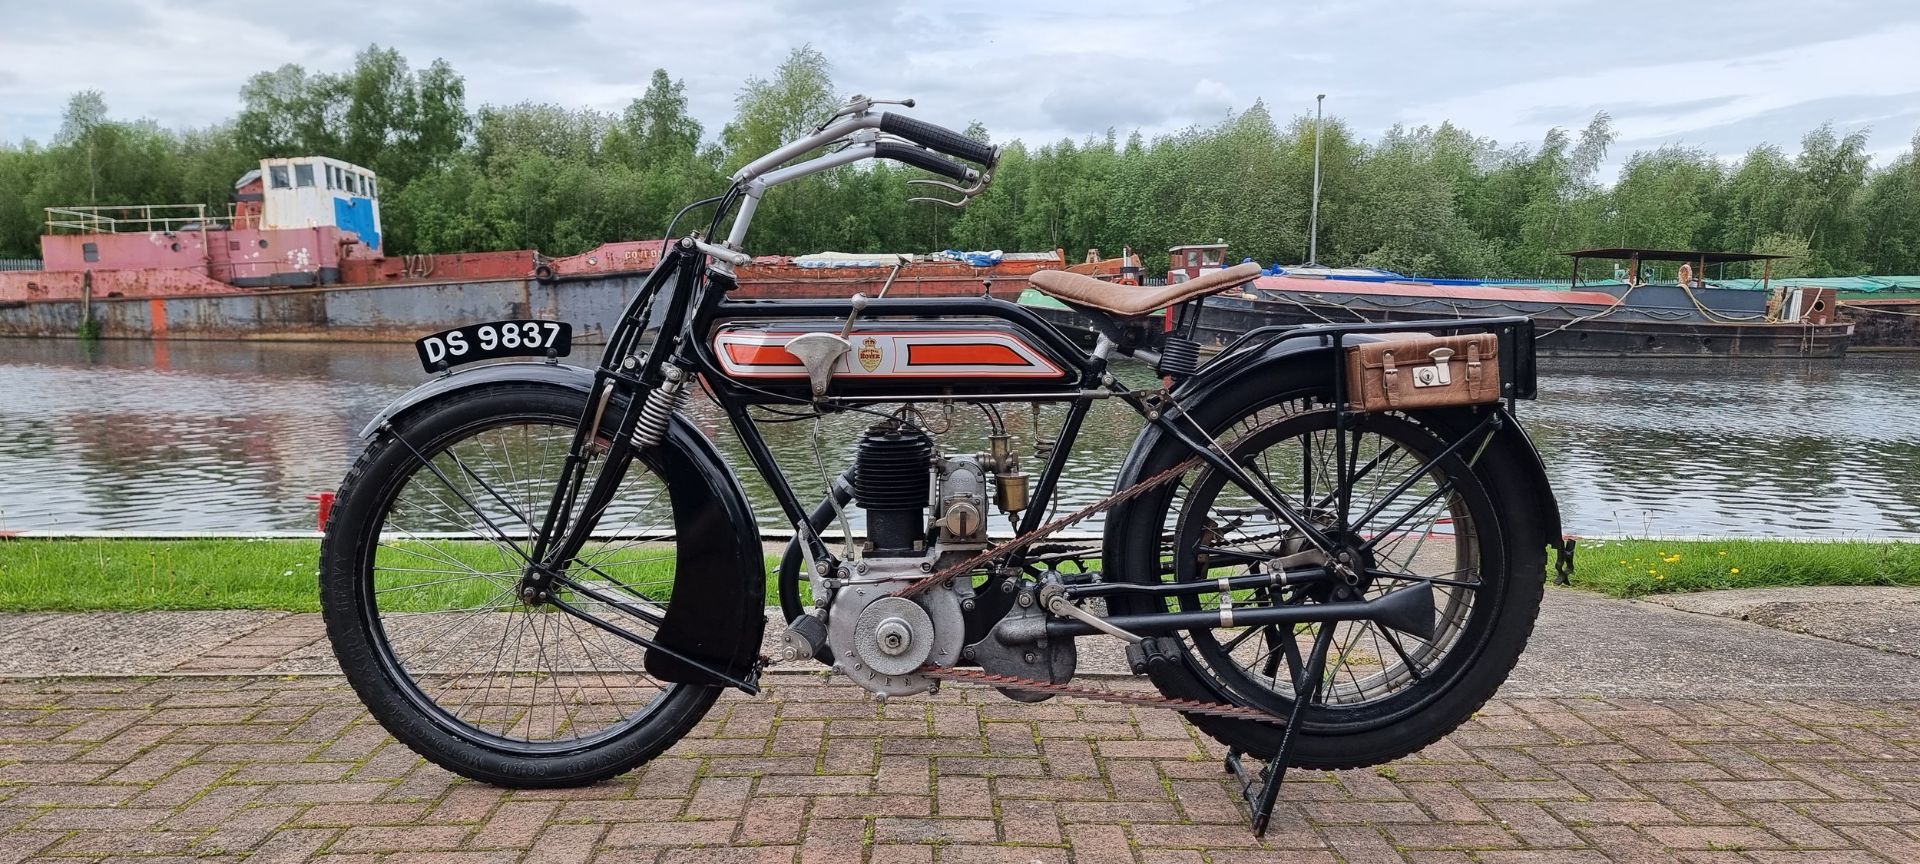 1913 Rover 3.5hp, 499 cc. Registration number DS 9837 (non-transferable). Frame number S37508. - Image 2 of 12